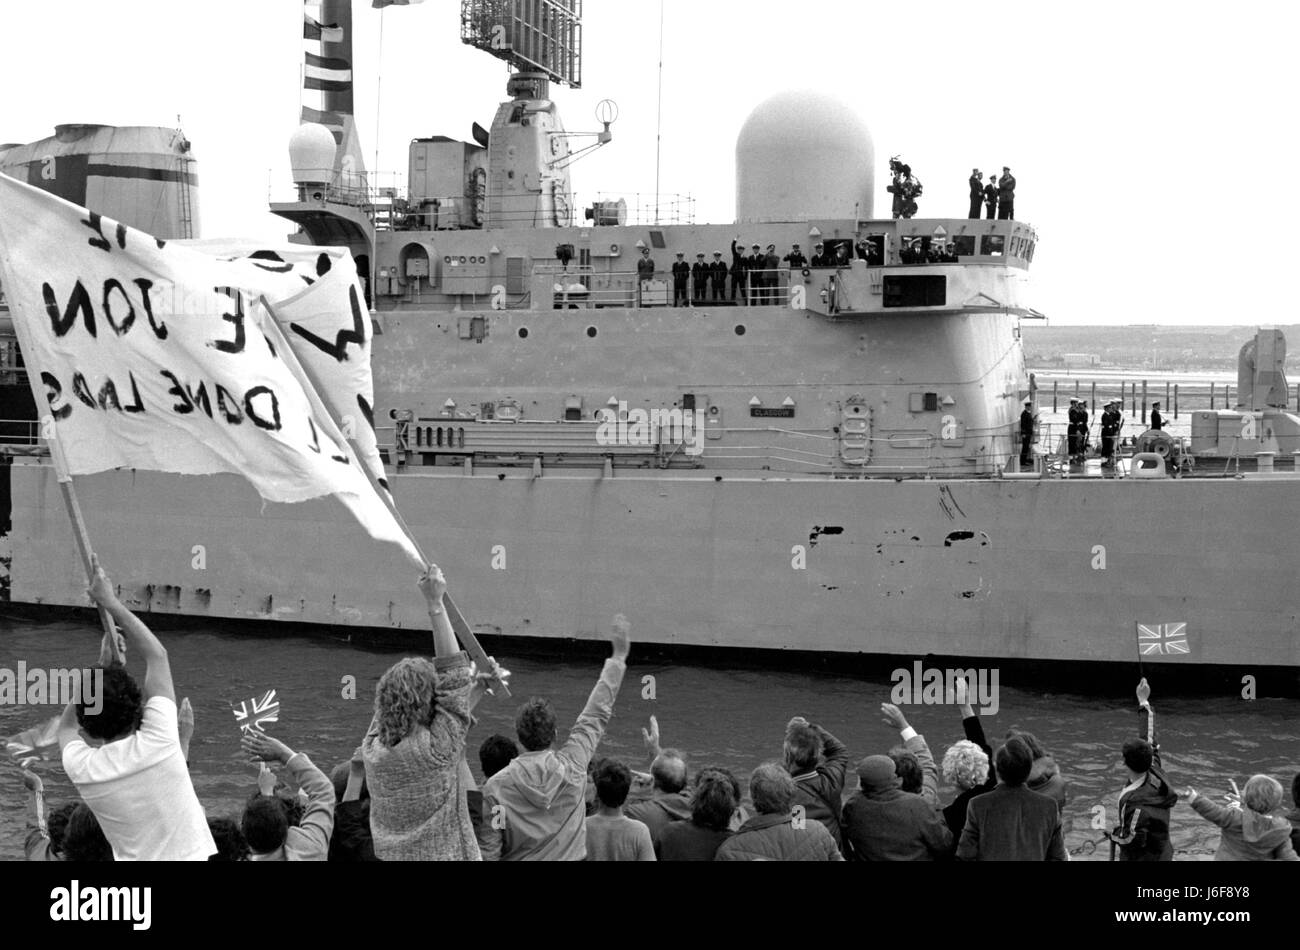 AJAXNETPHOTO. 19TH JUNE, 1982 - PORTSMOUTH, ENGLAND. - FALKLANDS VETERAN - SHEFFIELD CLASS (TYPE 42/1&2) DESTROYER HMS GLASGOW GETS A HEROES WELCOME AS THE BOMB DAMAGED SHIP RETURNED HOME FROM THE SOUTH ATLANTIC.  PHOTO:JONATHAN EASTLAND/AJAX.  REF:821906 13A Stock Photo